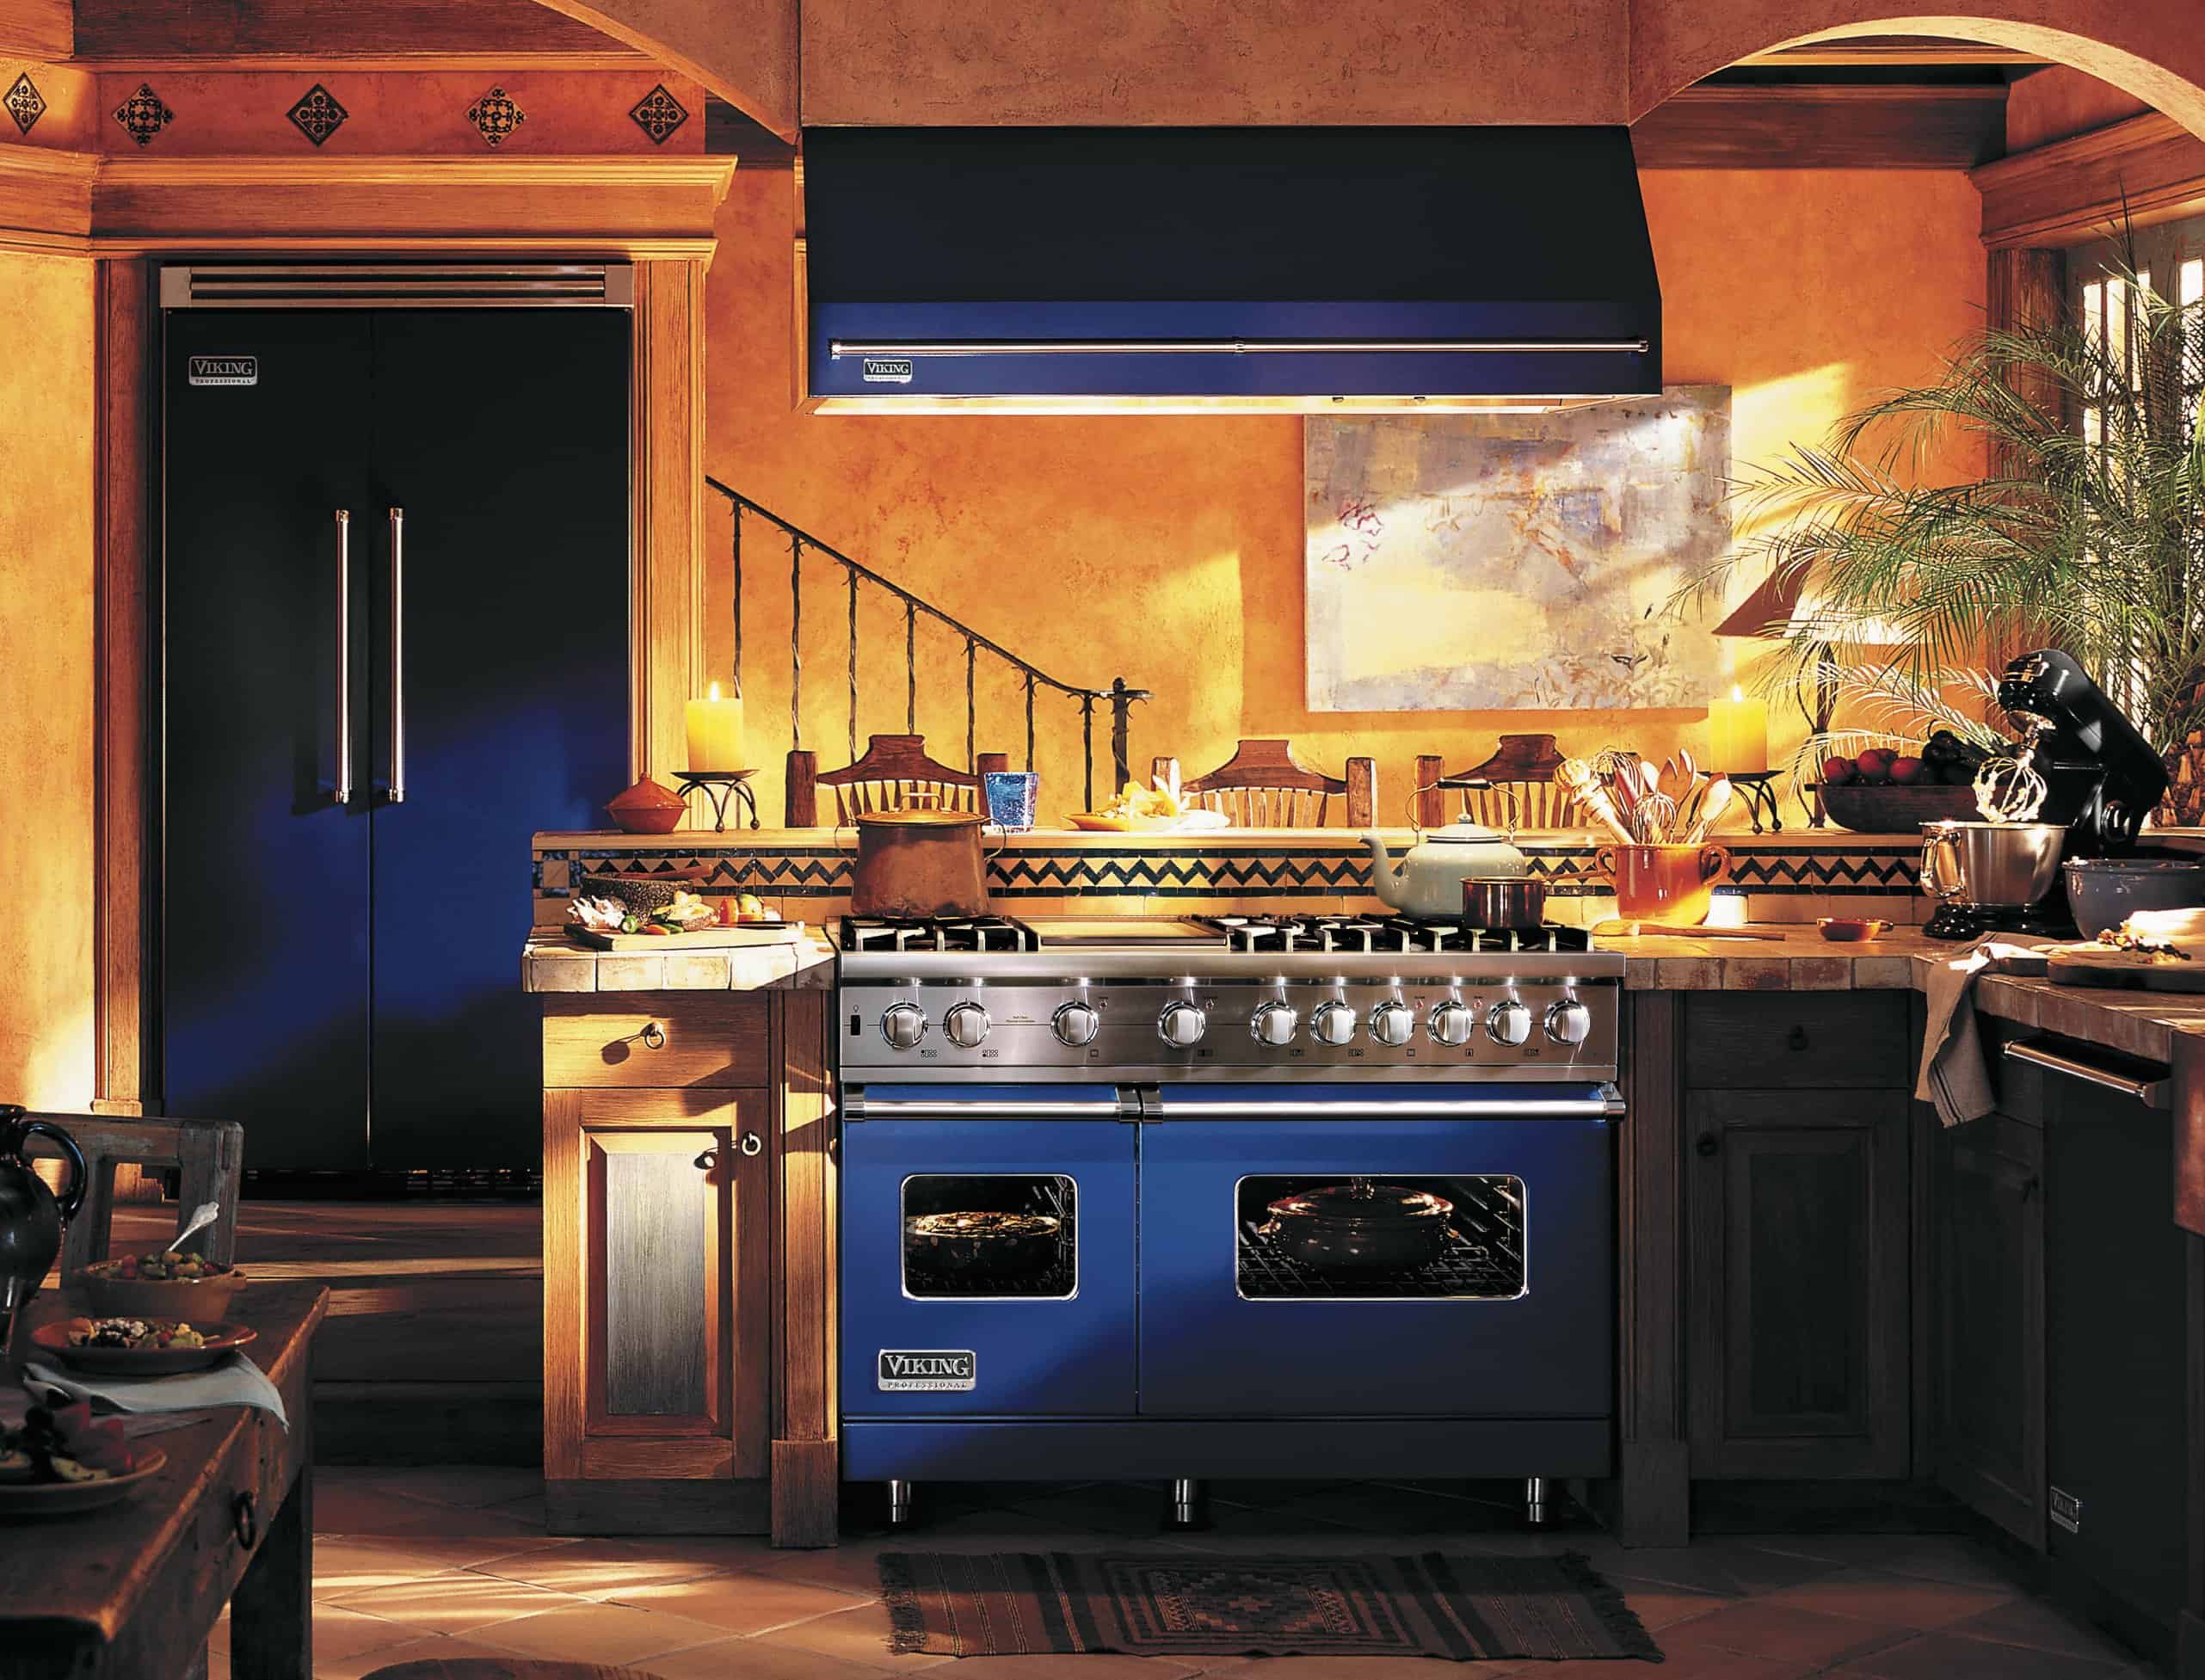 <em>We are absolutely obsessed with the idea of having a cobalt blue stove there is something so unique and fun about it yet vintage in a way</em>